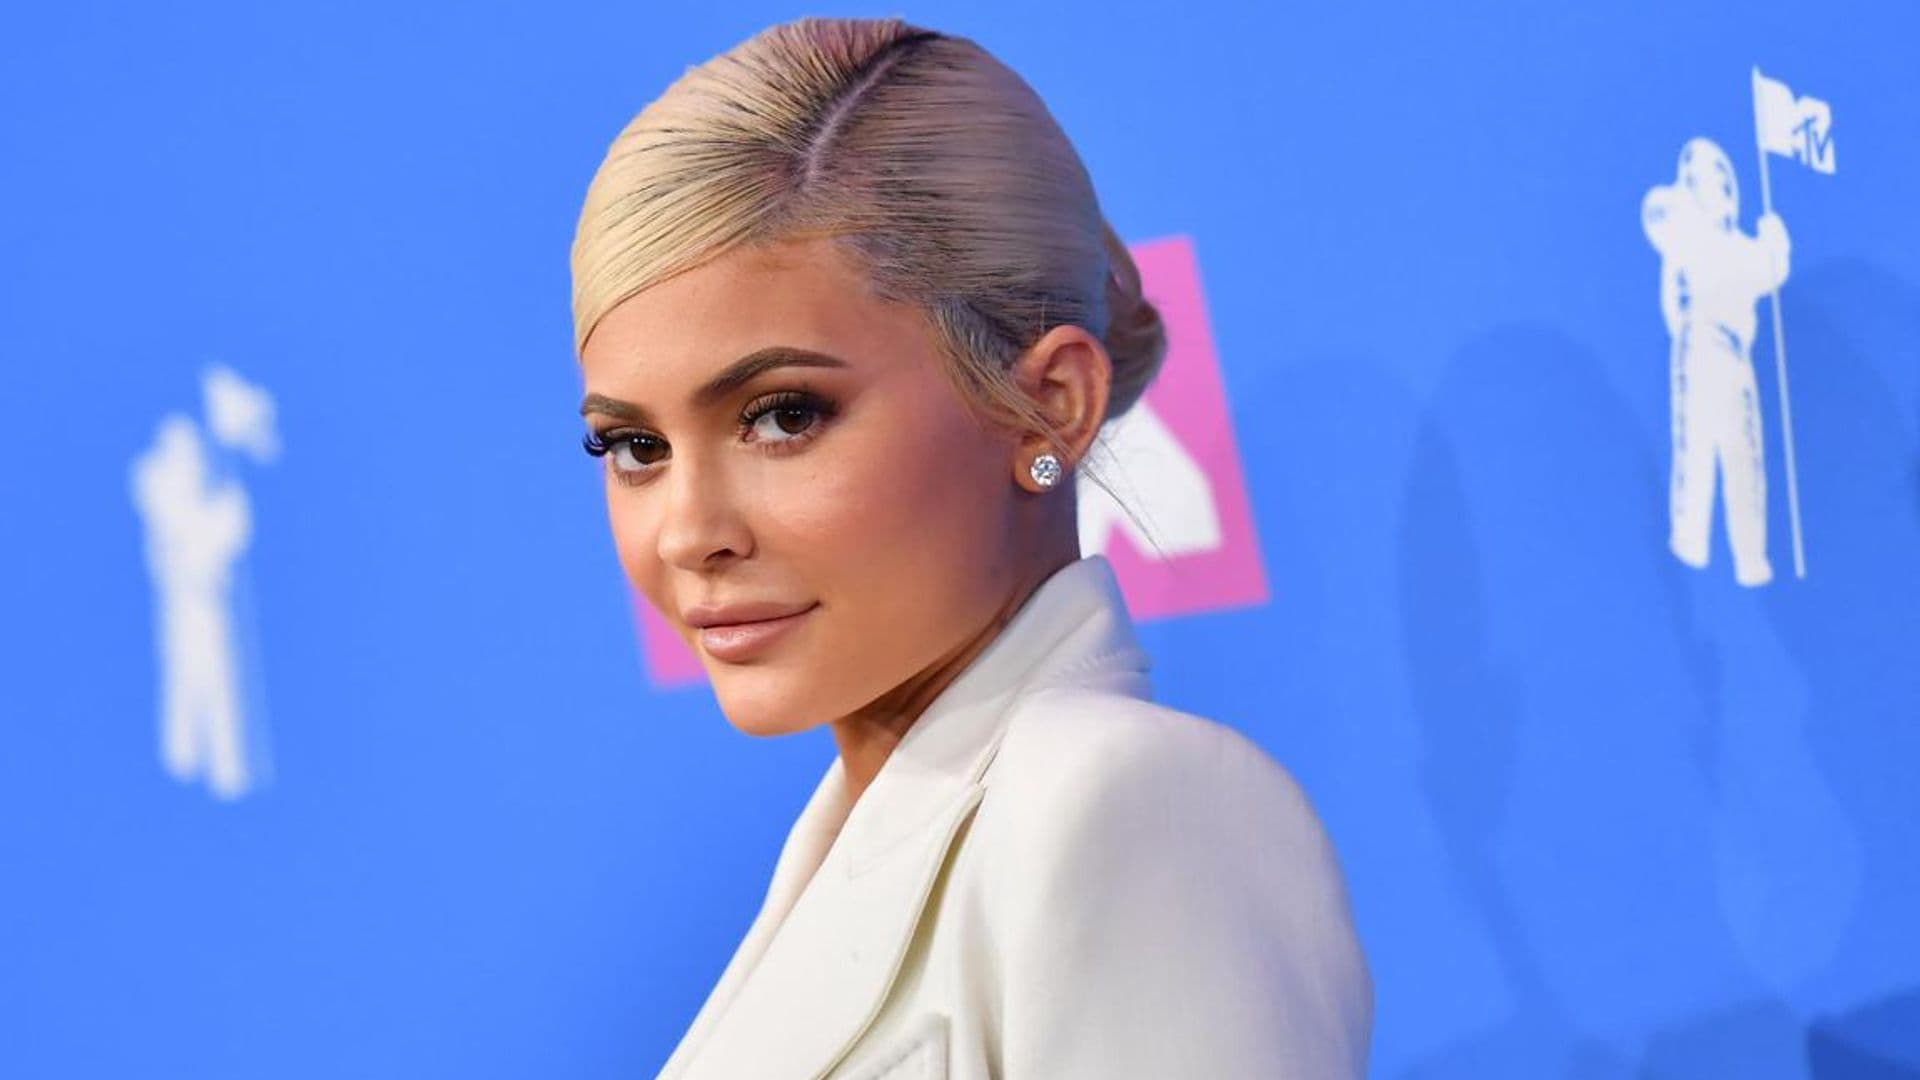 Kylie Jenner responds to Forbes claims on her ‘web of lies’ and stripping her of her billionaire title